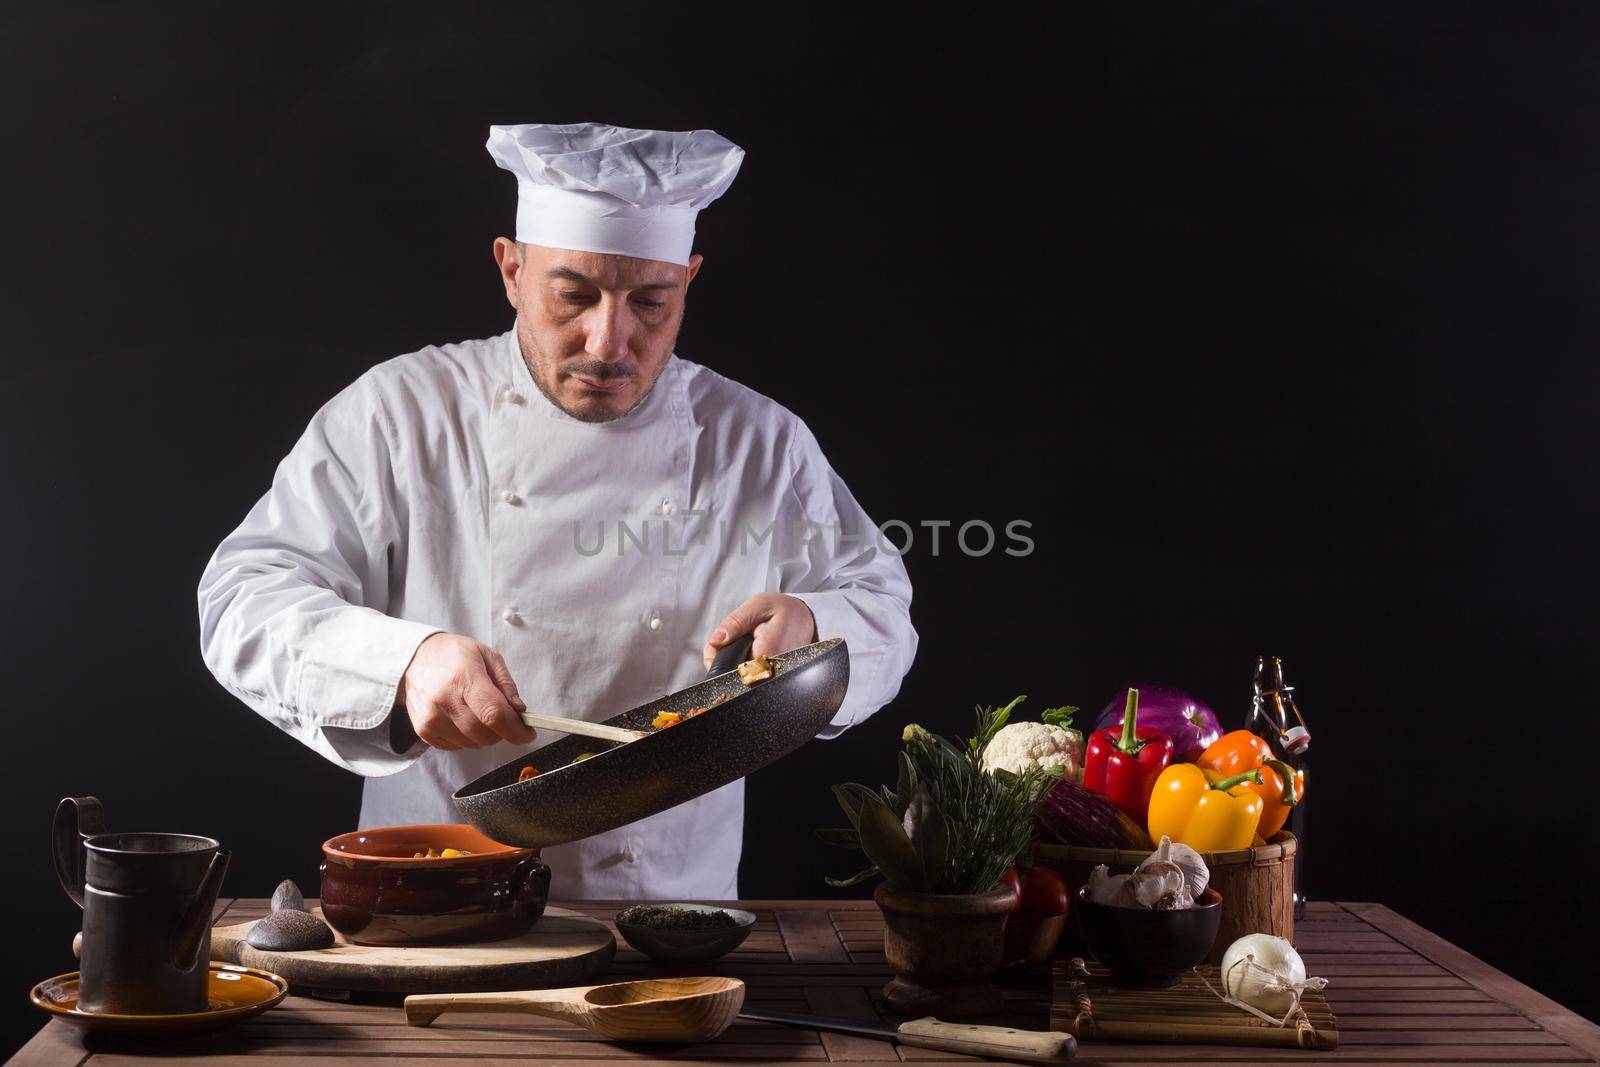 Male chef in white uniform preparing food plate with vegetables before serving while working in a restaurant kitchen